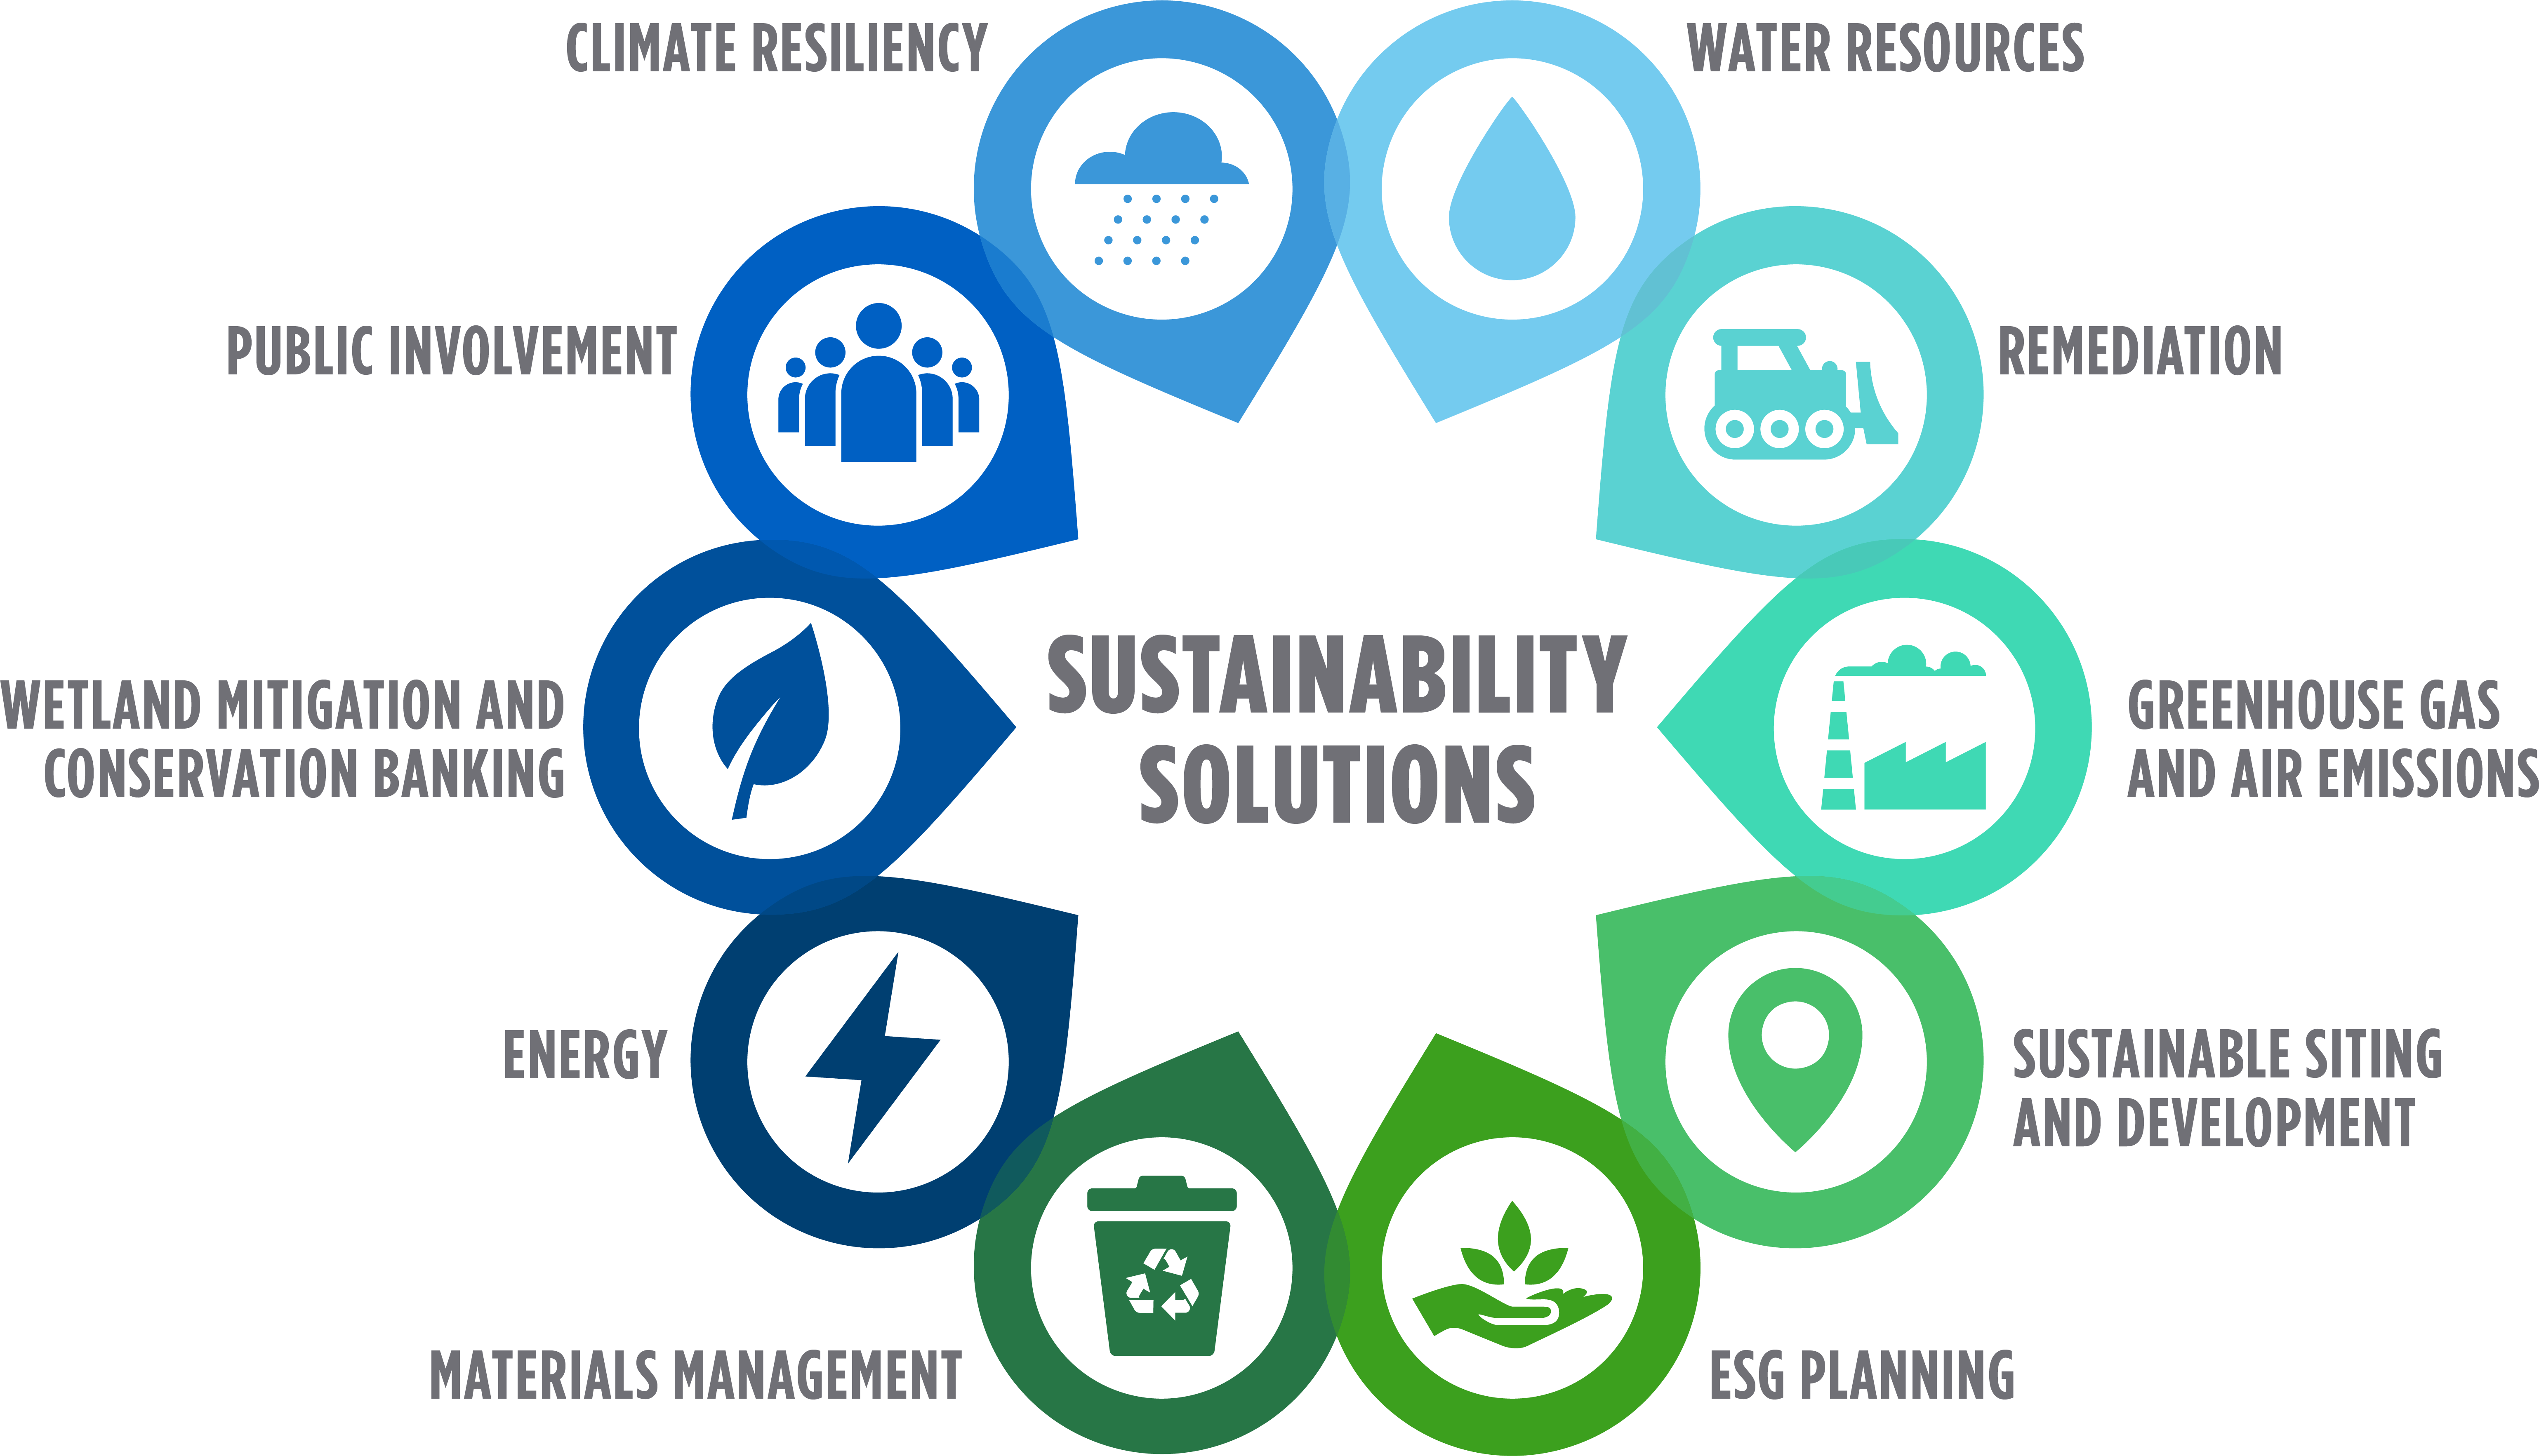 Eagle Creek - Sustainability Facts, Rating, Goals